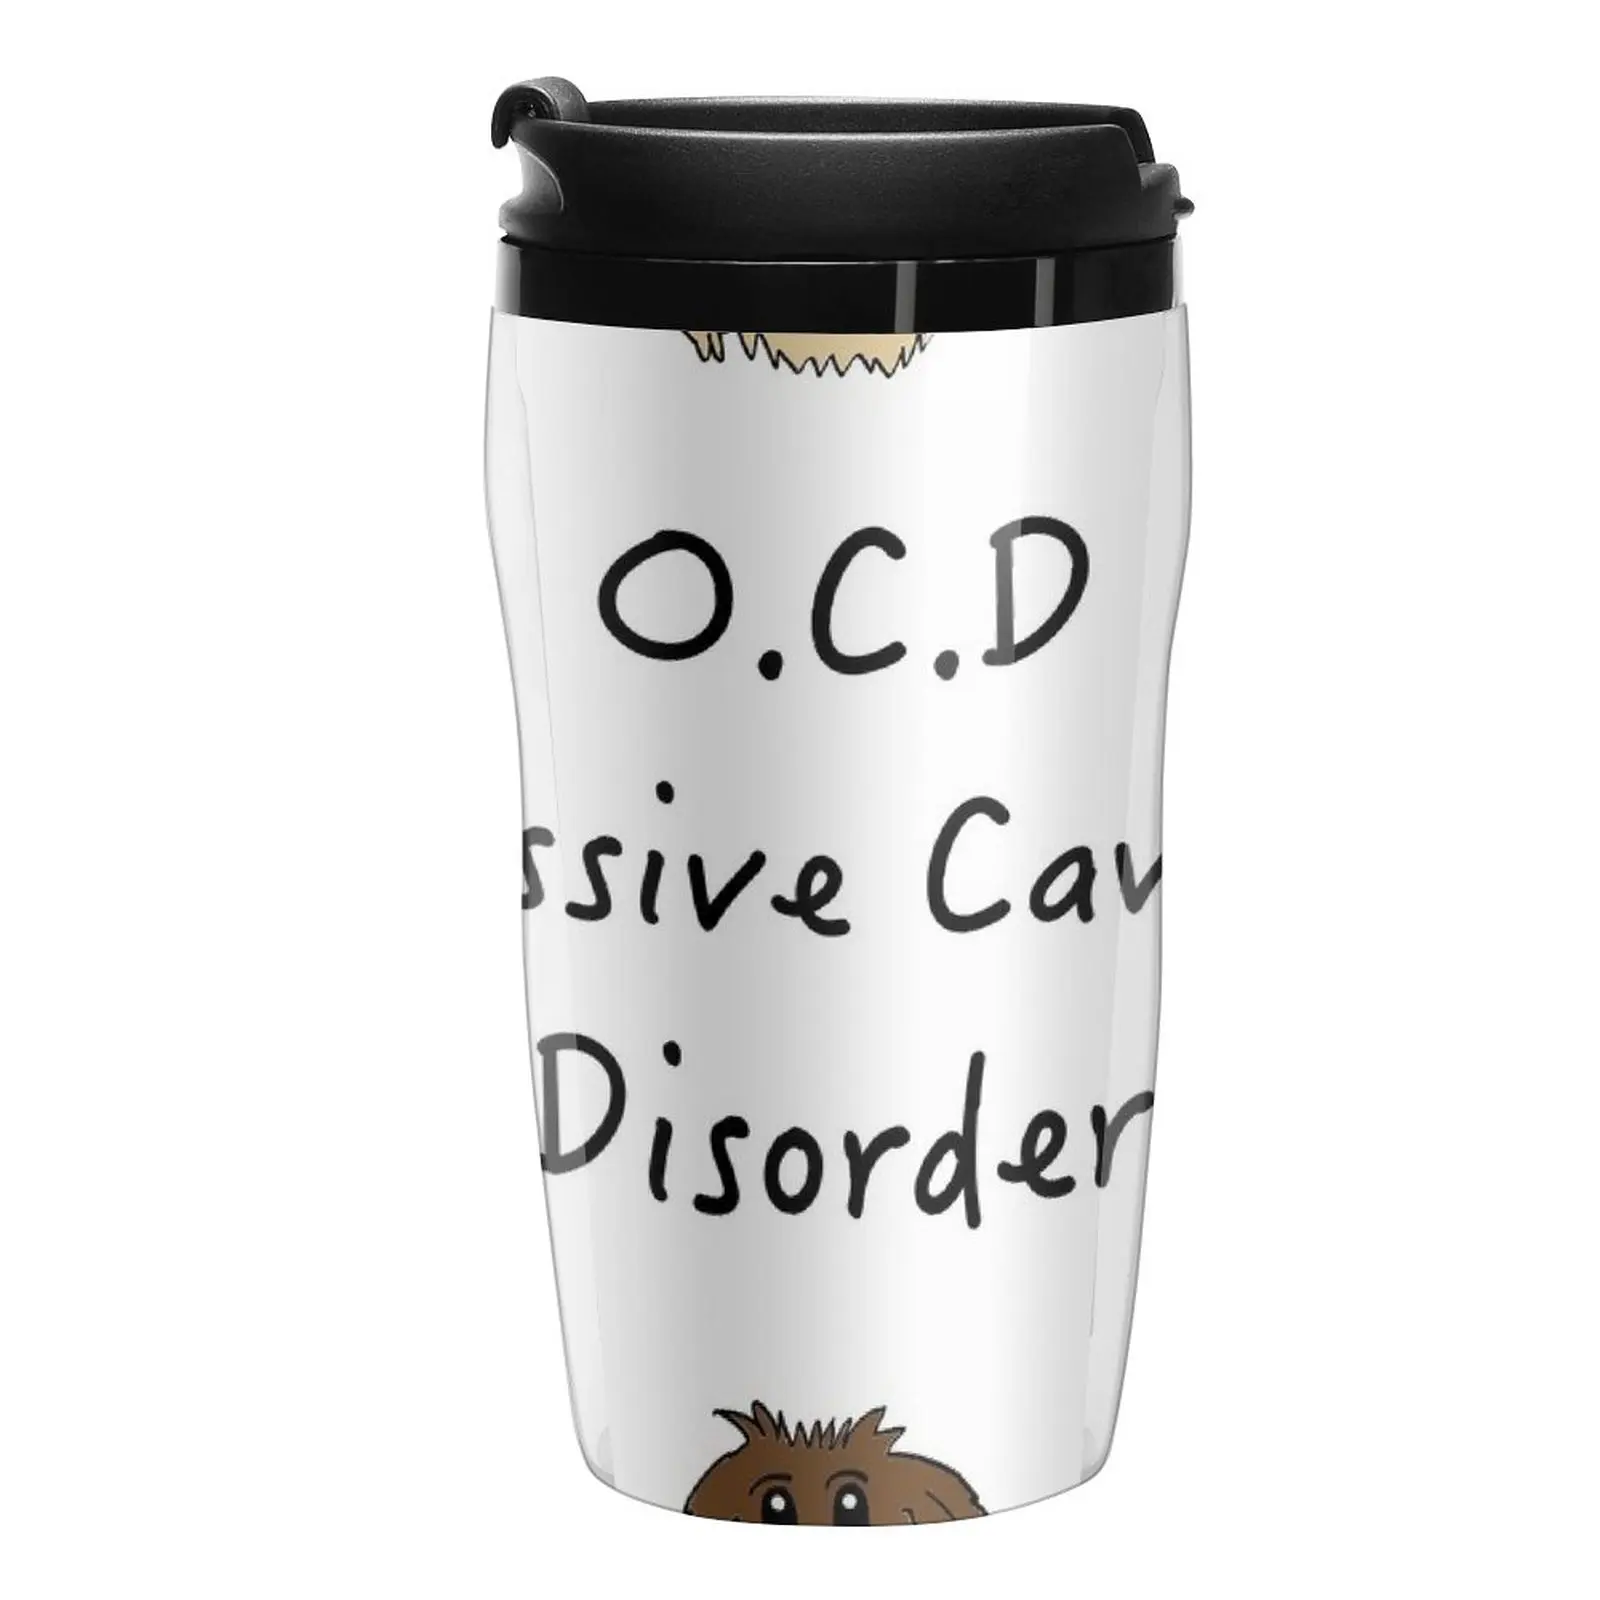 

New OCD Obsessive Cavoodle Disorder Travel Coffee Mug Original And Funny Cups To Give Away Sets Of Te And Coffee Cups